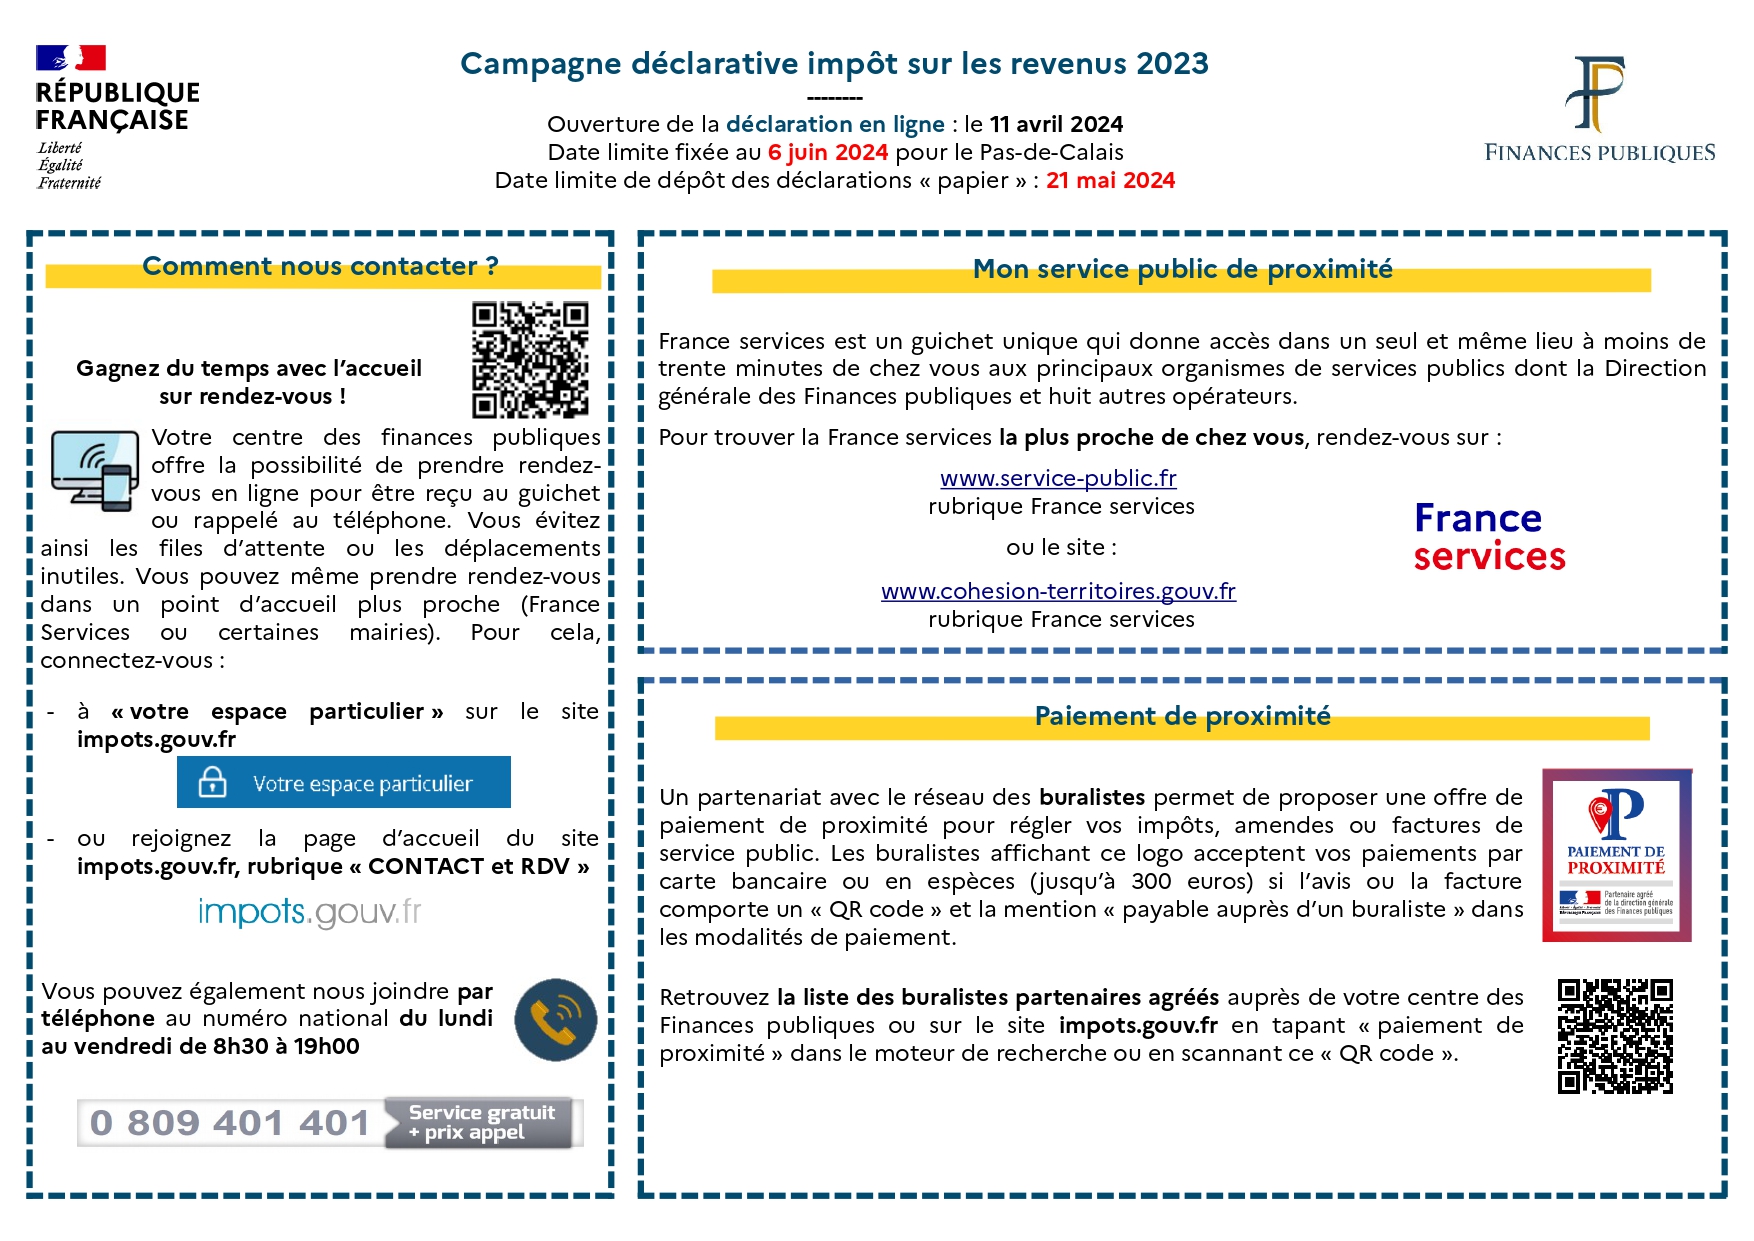 Flyer - Comment nous contacter campagne IR 2024-Vdef_page-0001.jpg